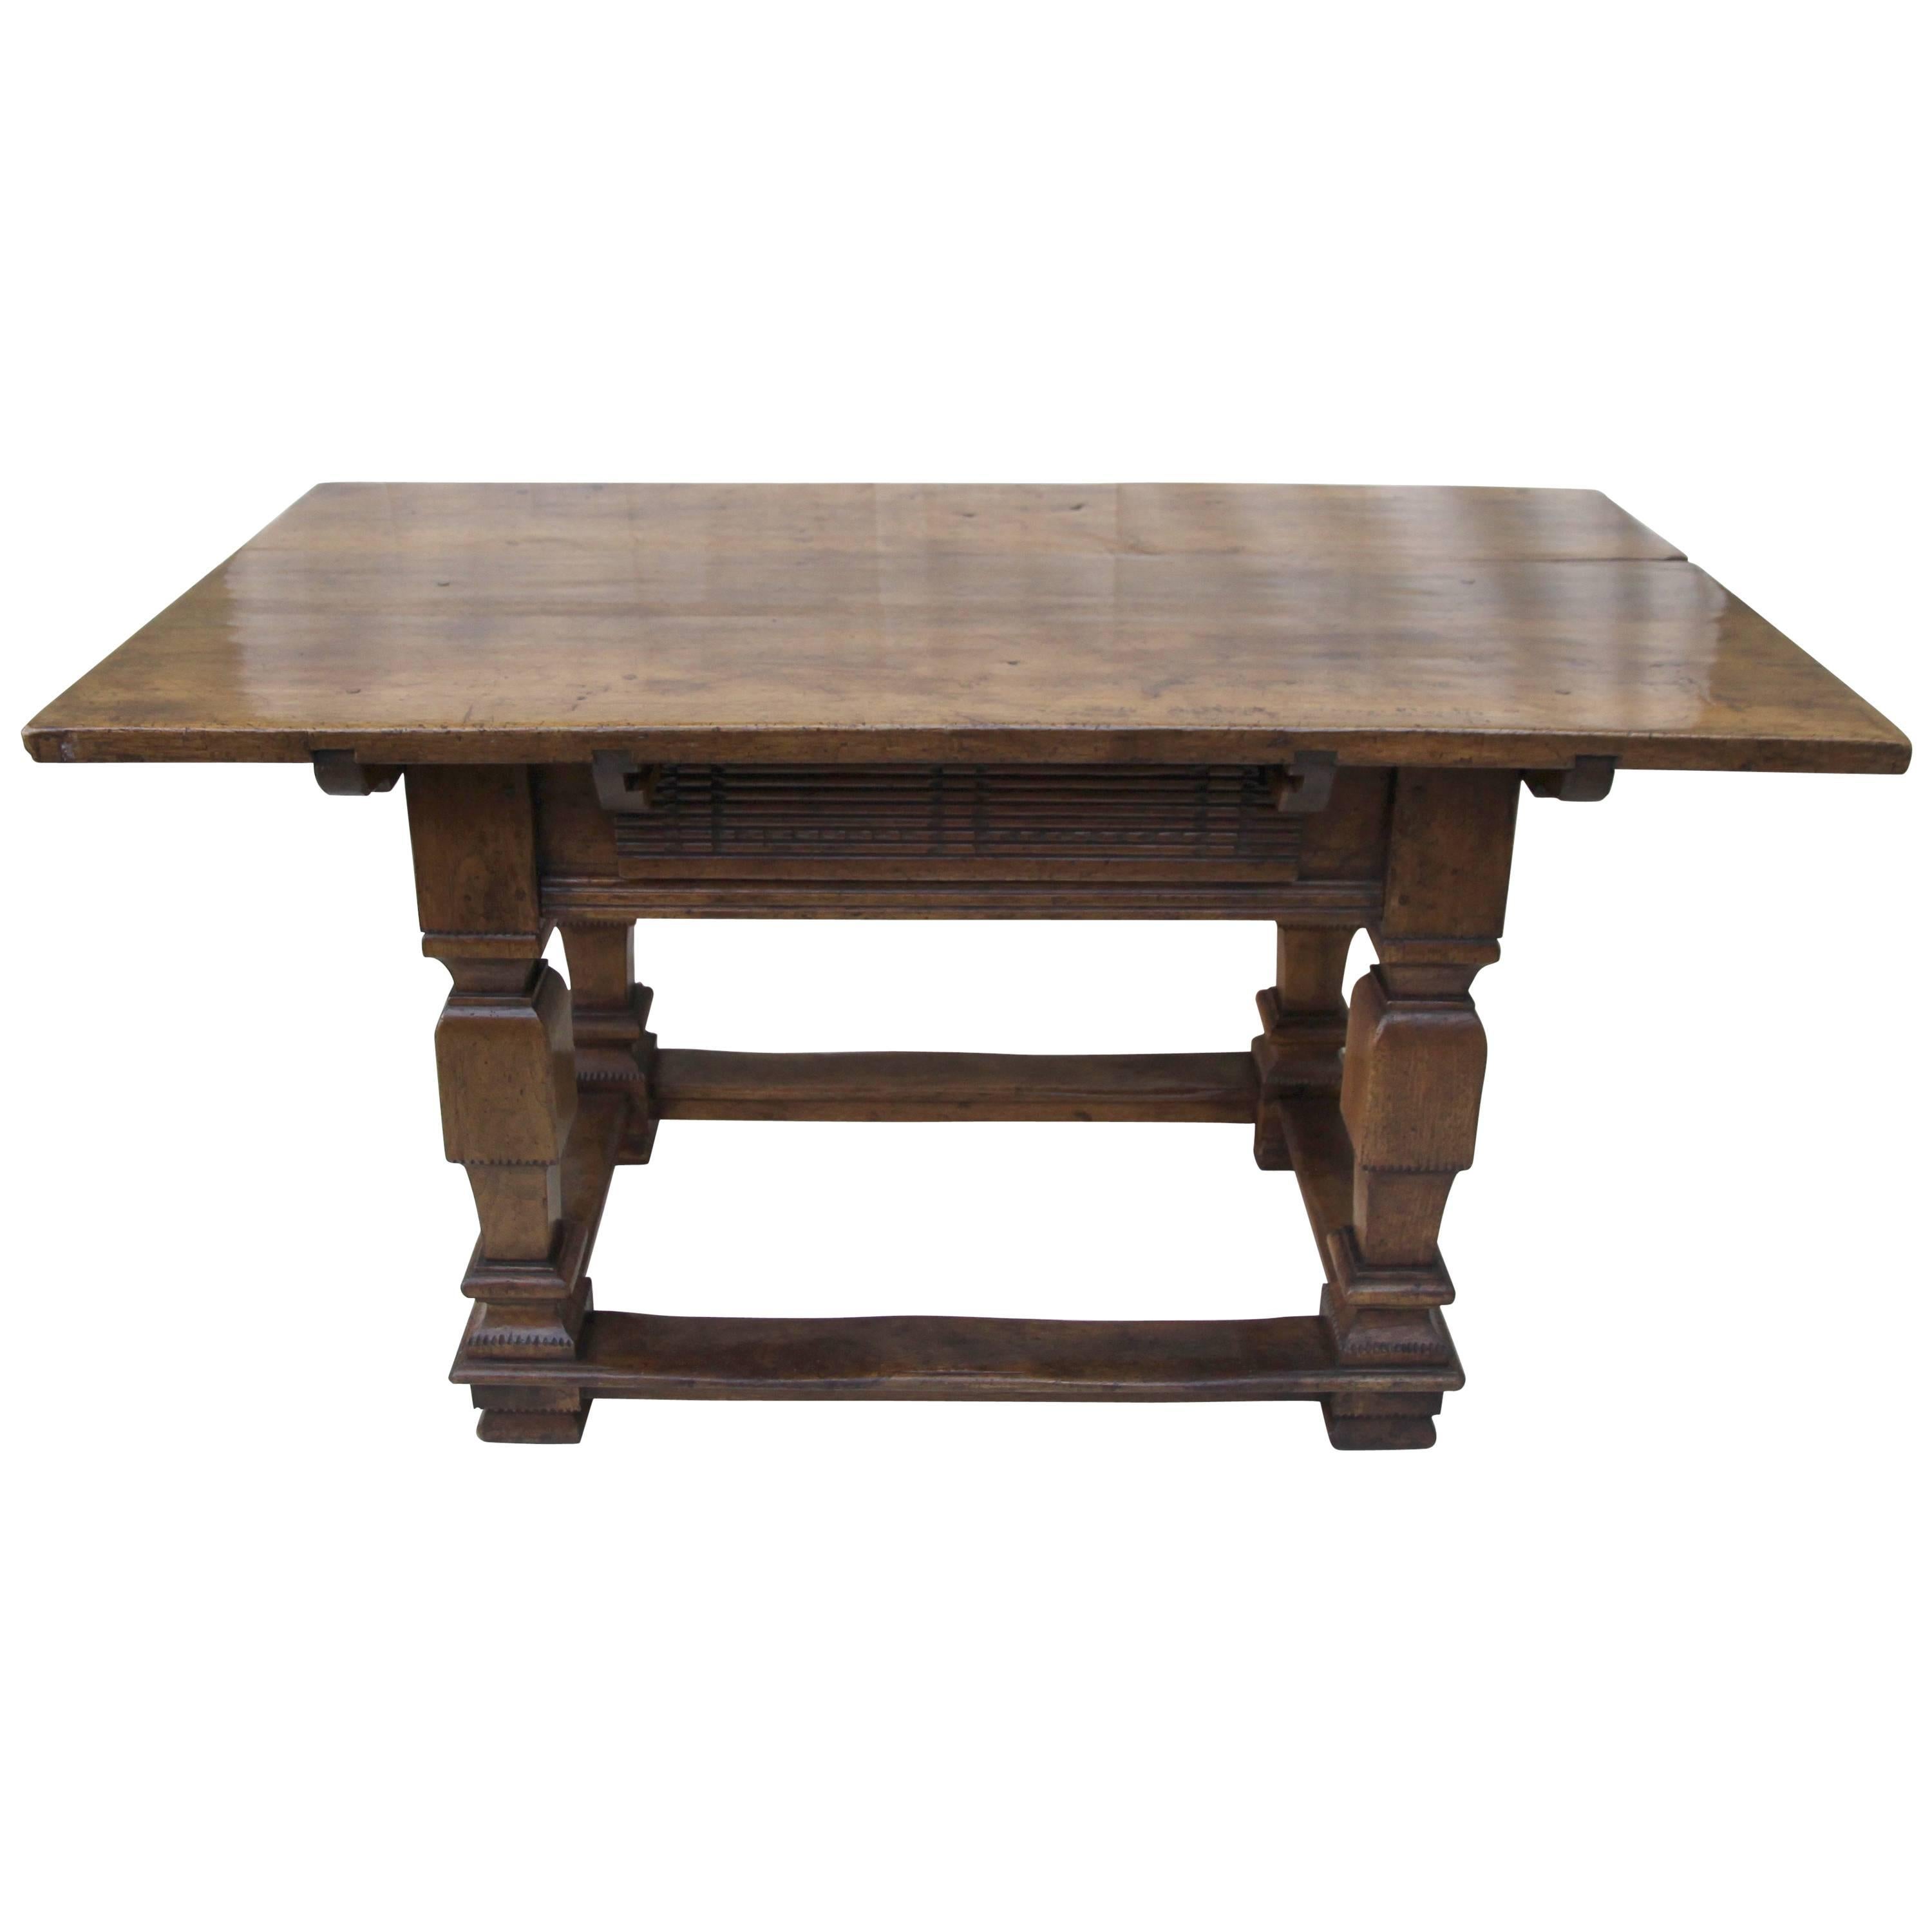 Italian Walnut Table with Center Drawer